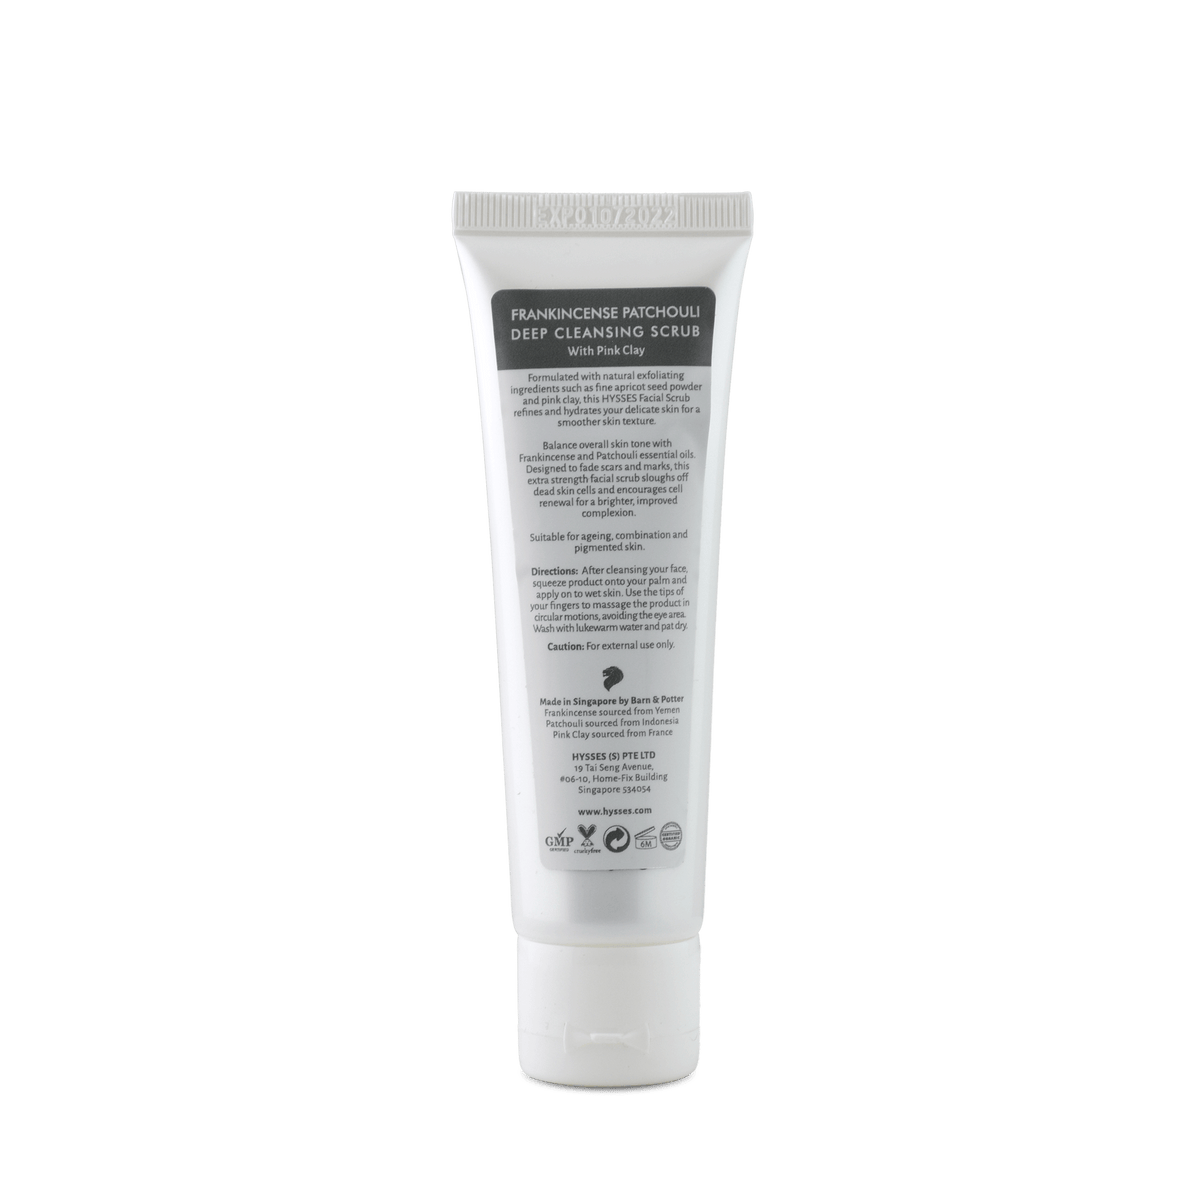 Facial Scrub Deep Cleansing Frankincense Patchouli - Hysses Singapore